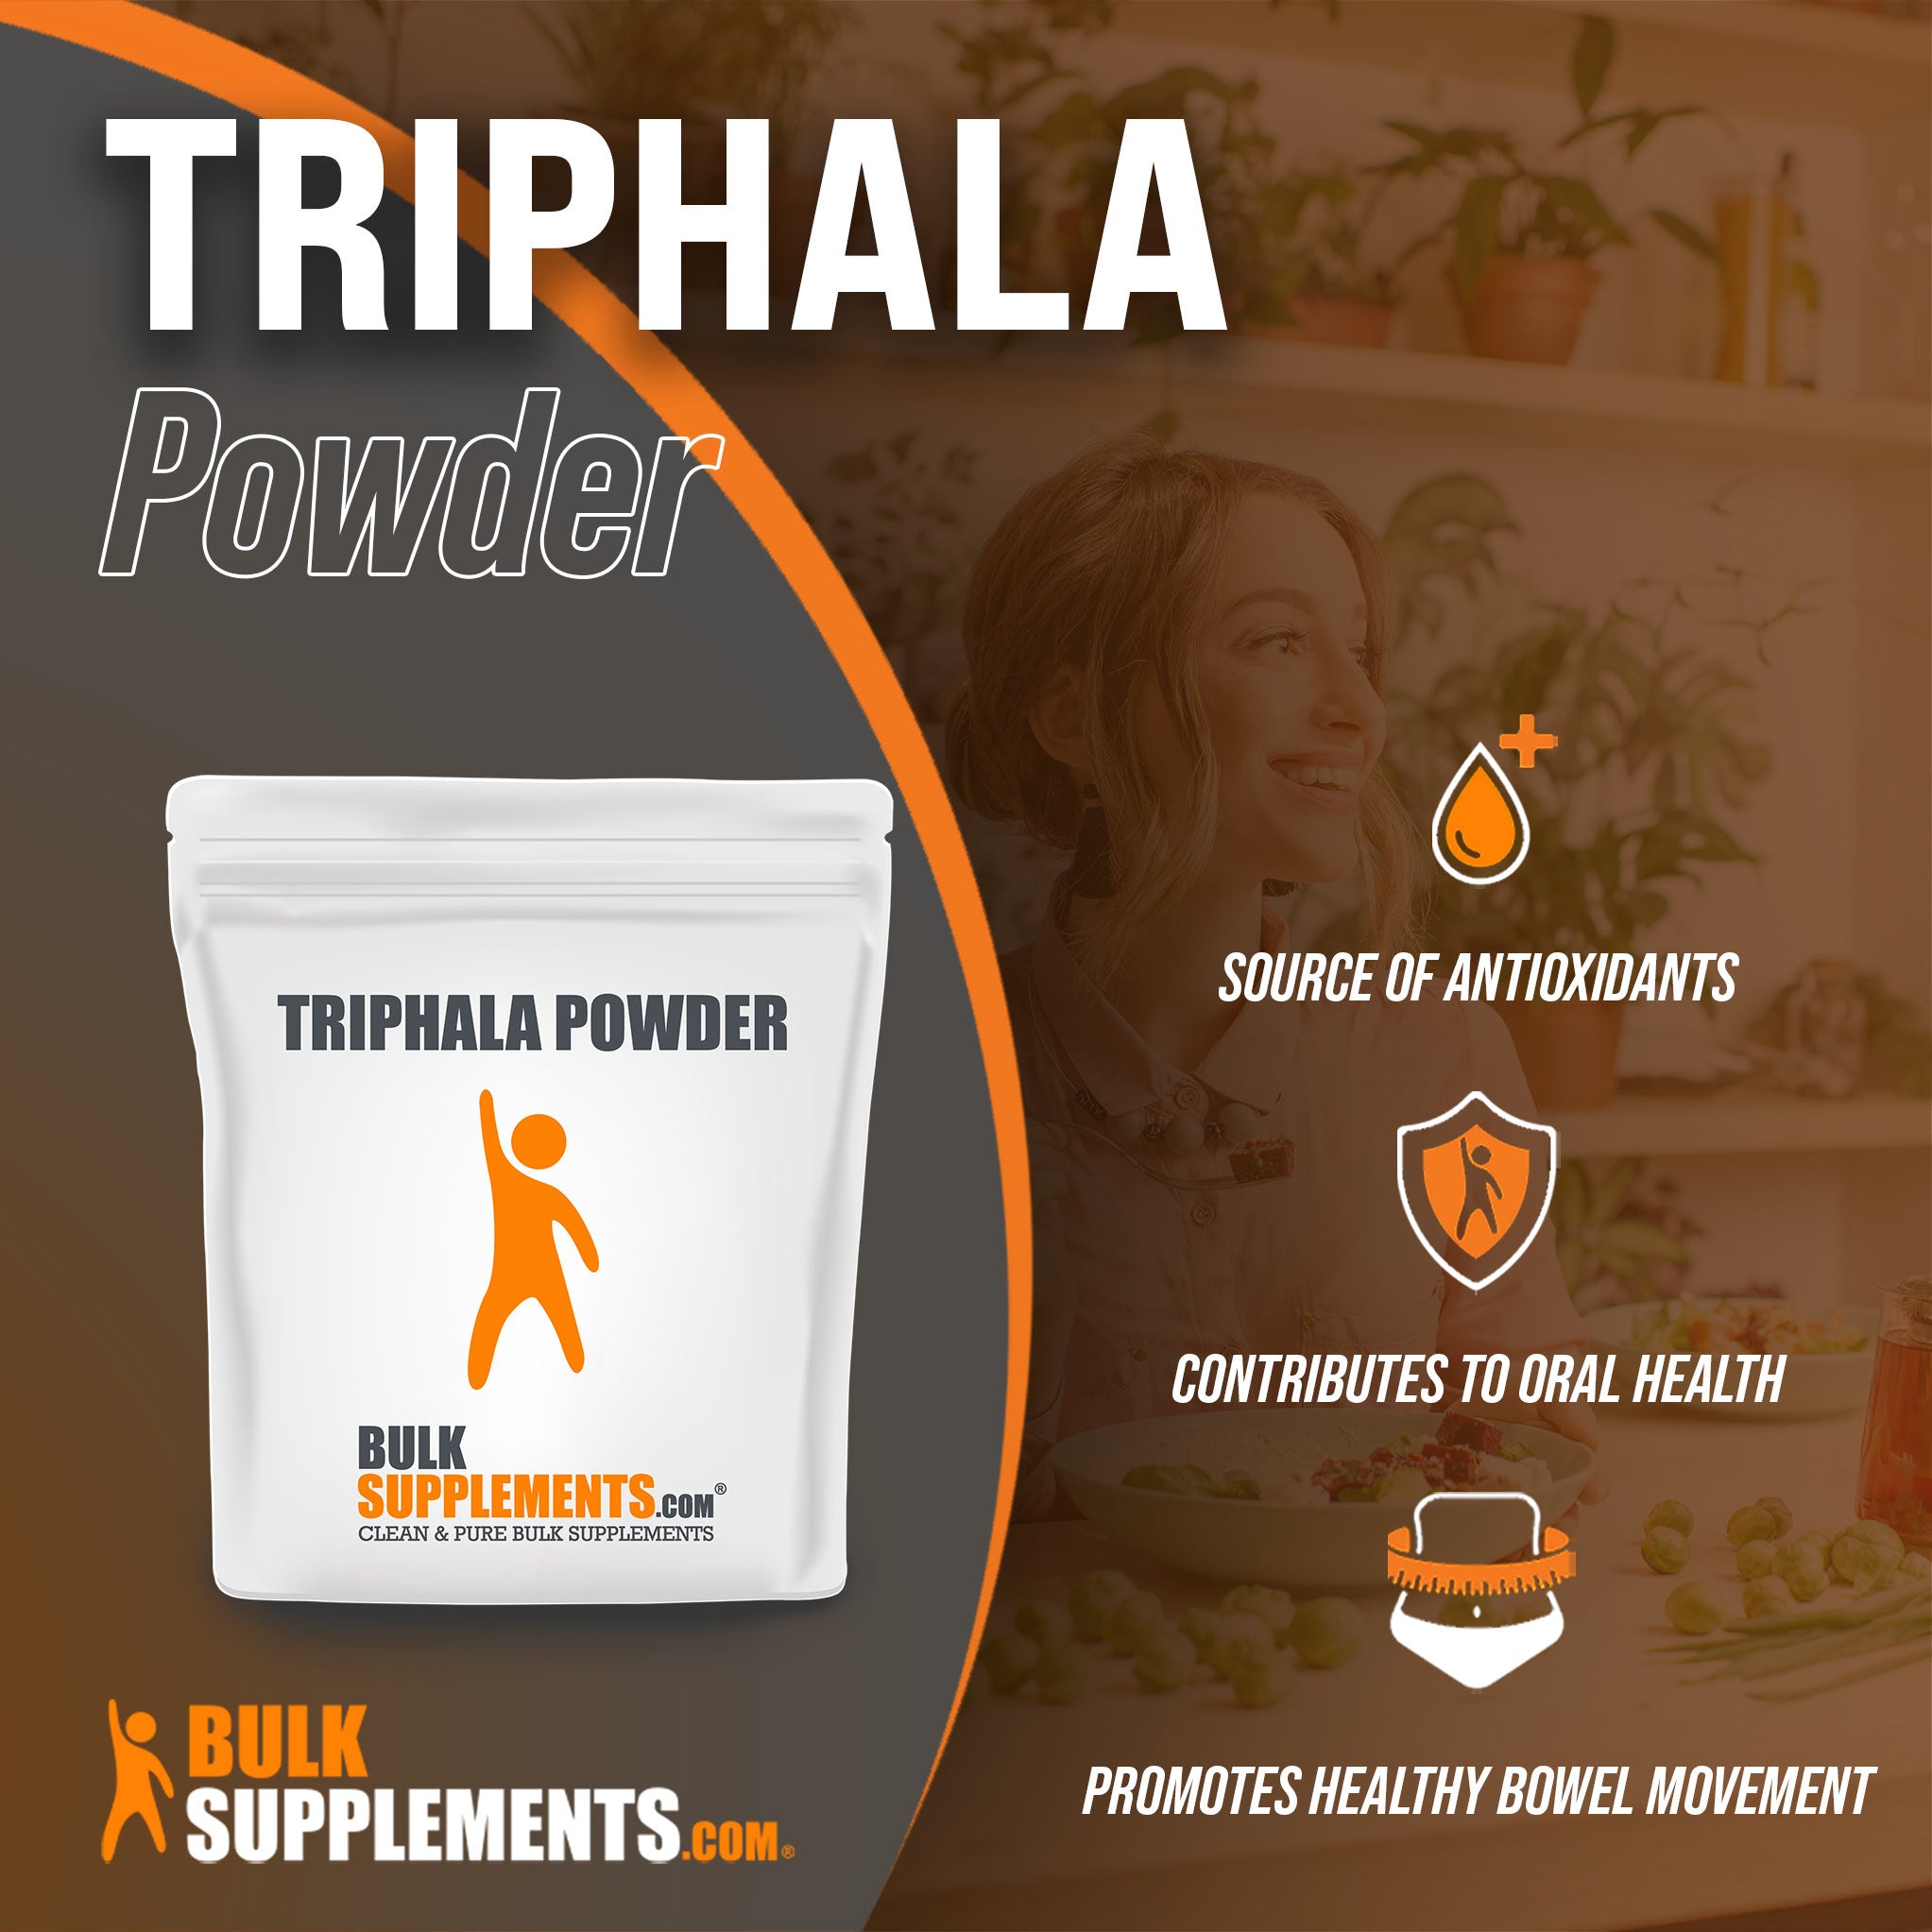 Benefits of Triphala: source of antioxidants, contributes to oral health, promotes healthy bowel movement